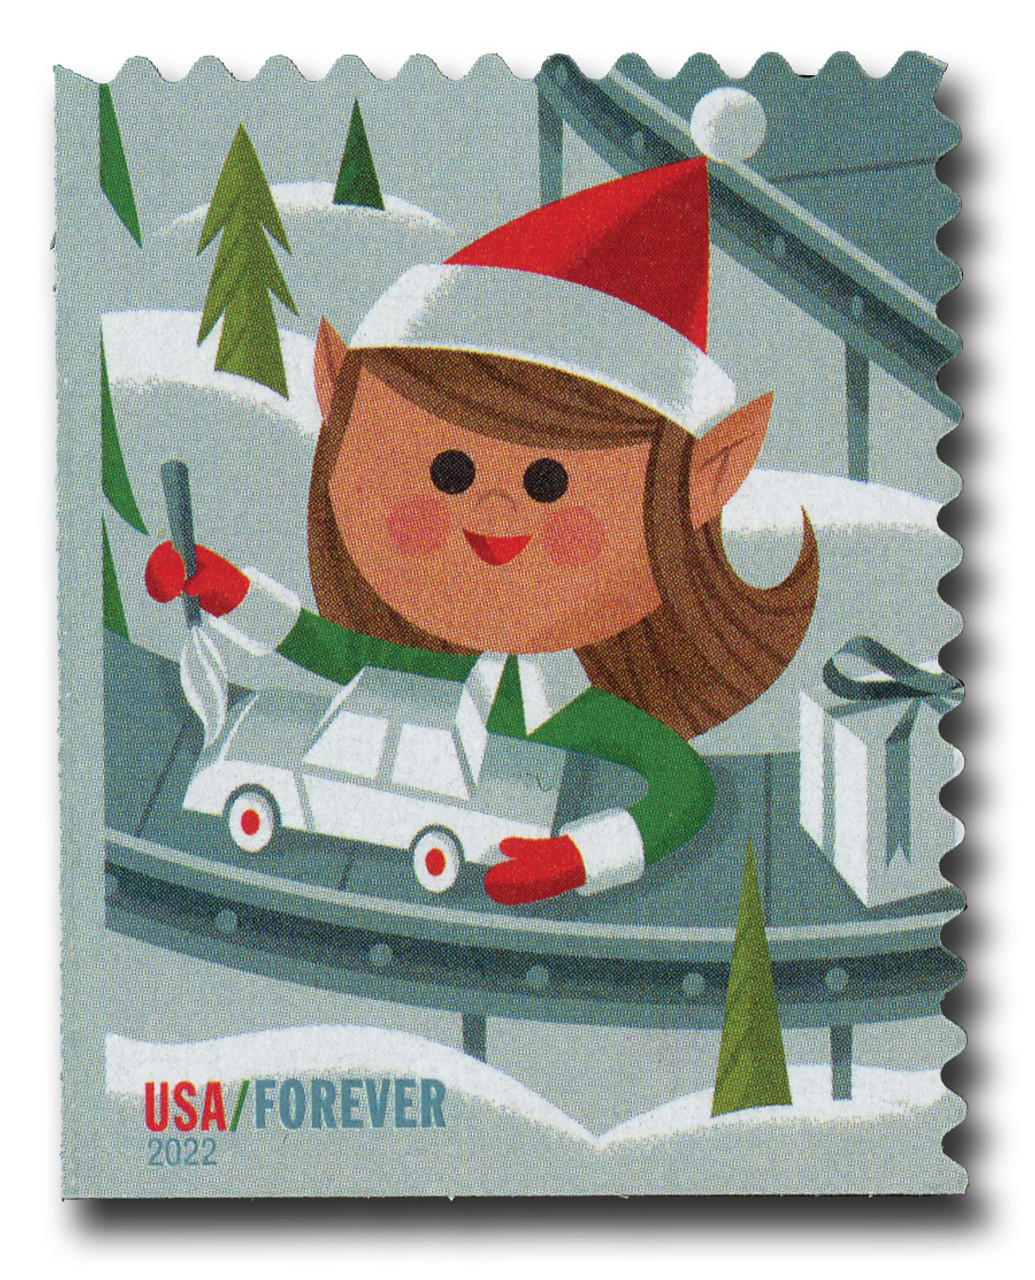 Holiday Wreaths Book of 20 Forever Stamps Christmas Tradition Celebration  Scott Holiday Wreaths Book of 20 Forever Postage Stamps Christmas Tradition